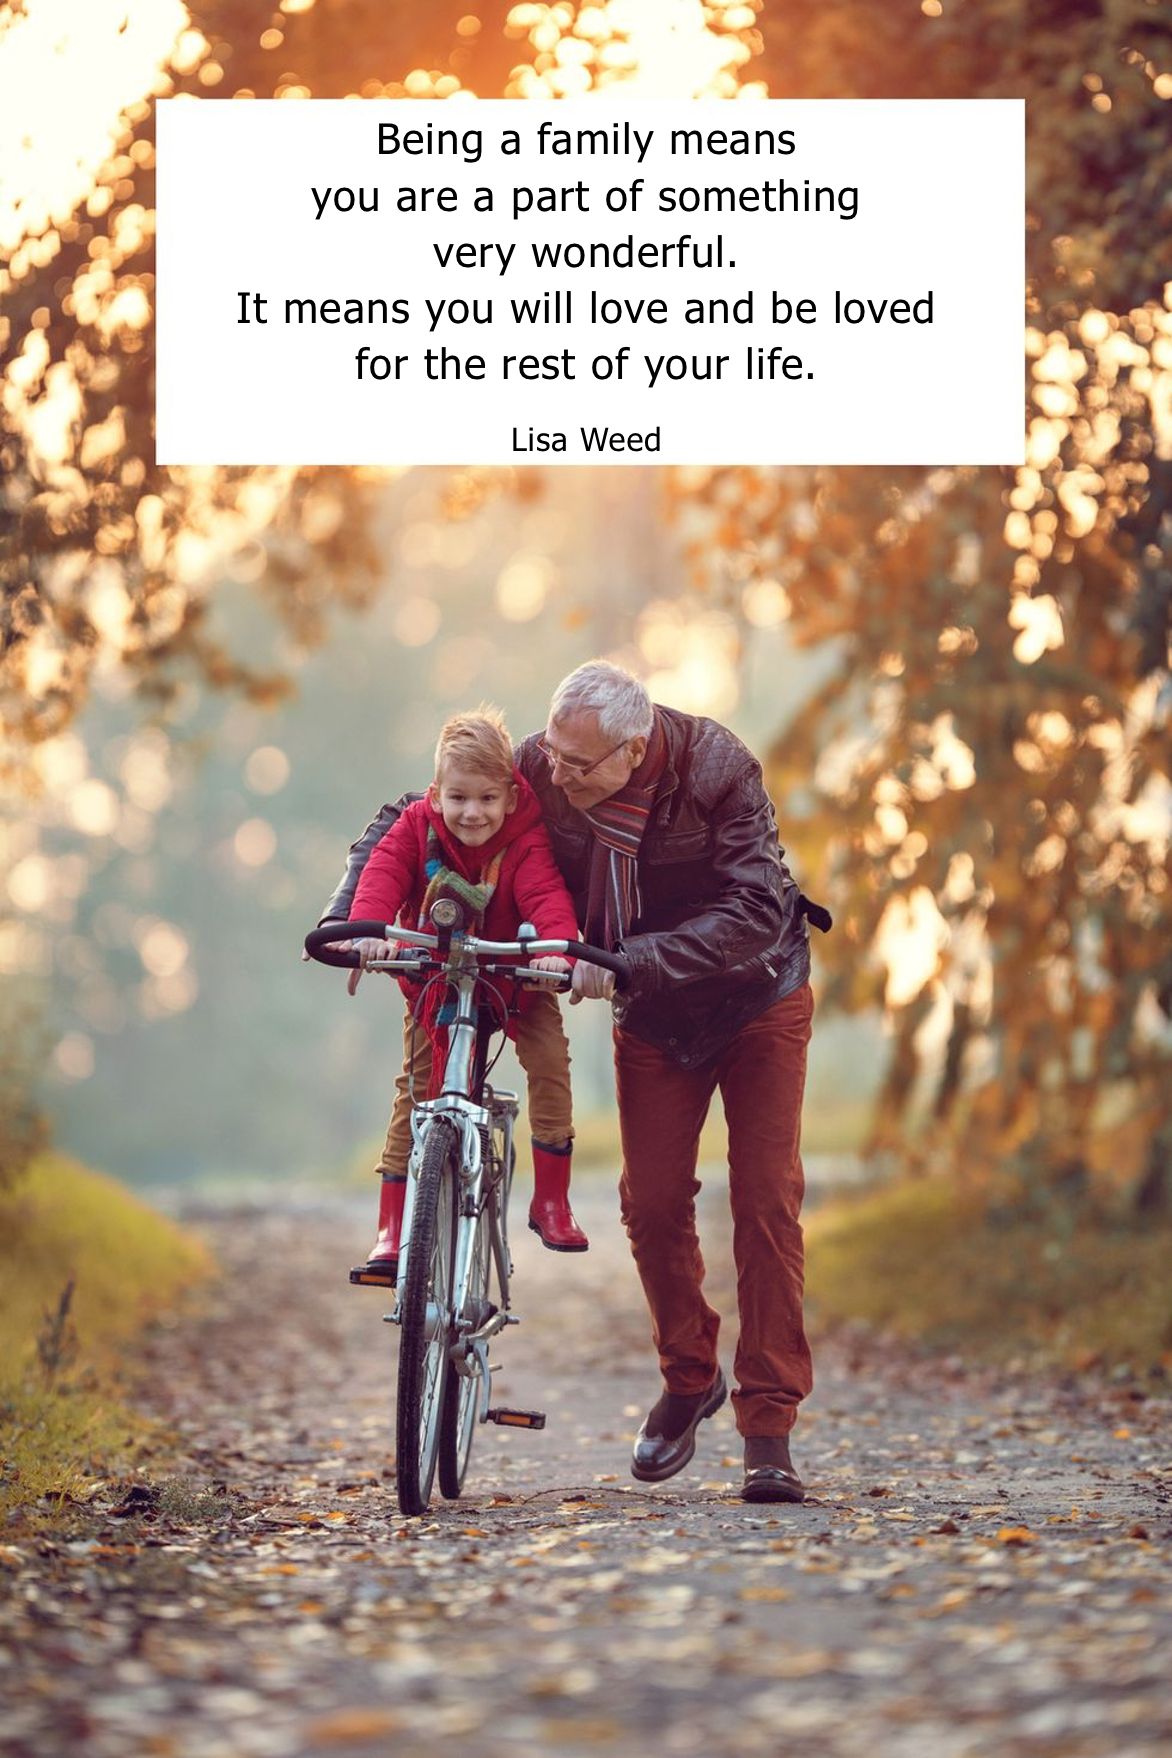 quotes on life and love with images